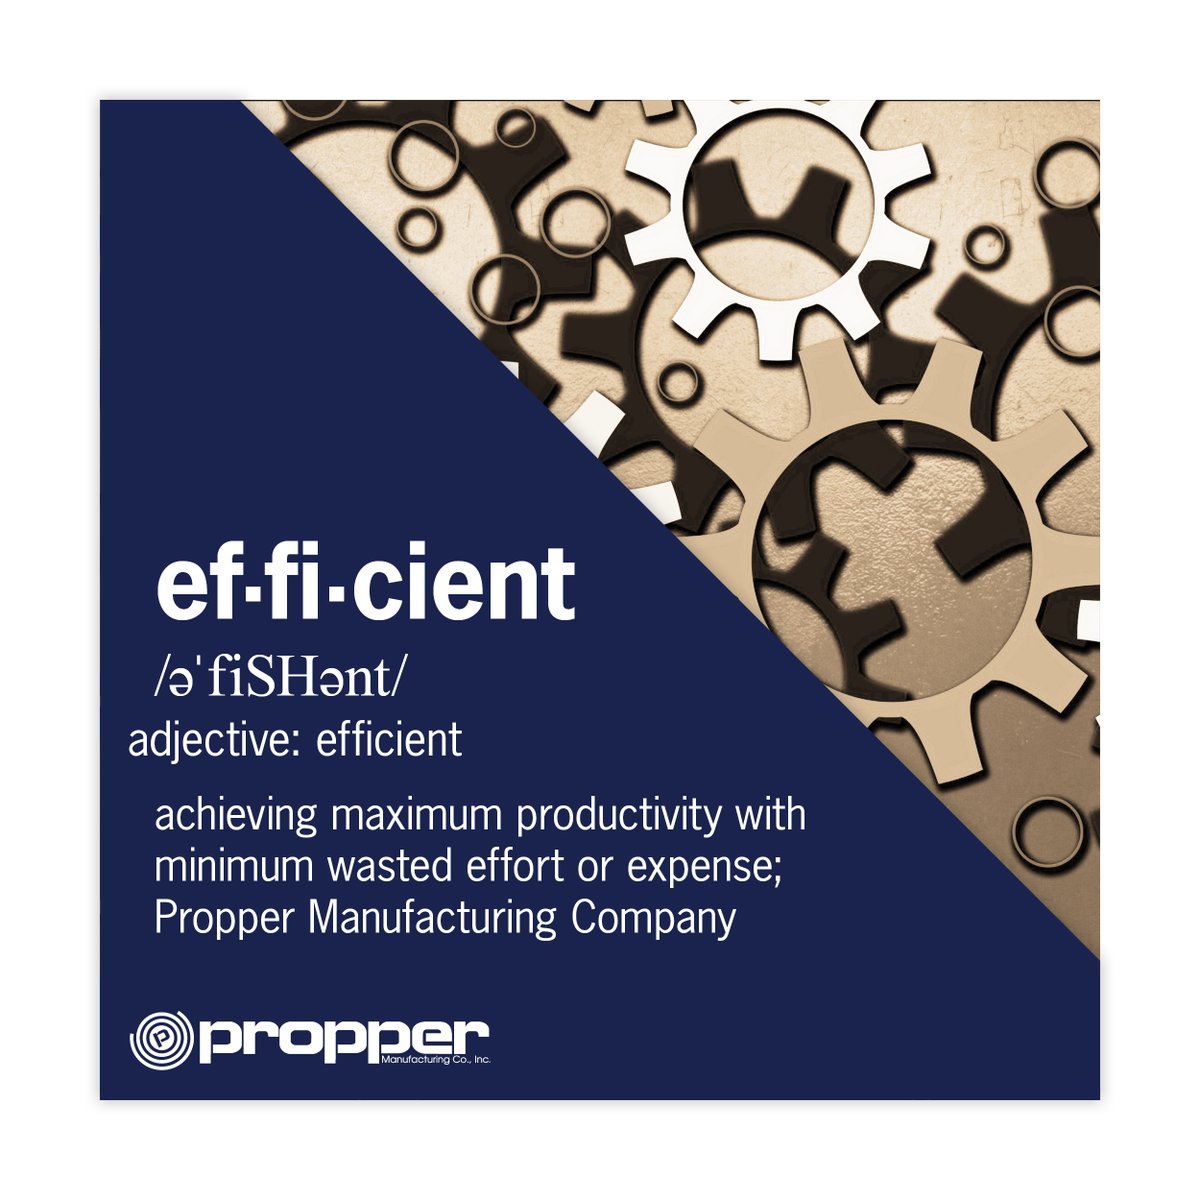 🏭 Propper Mfg Co., as a leading #manufacturer, excels in efficiently adapting our products to meet the demands of a world grappling with challenging supply chain limitations.

#Manufacturing #SupplyChainSolutions #Adaptability #Efficiency #CustomerSupport #BusinessPartnership